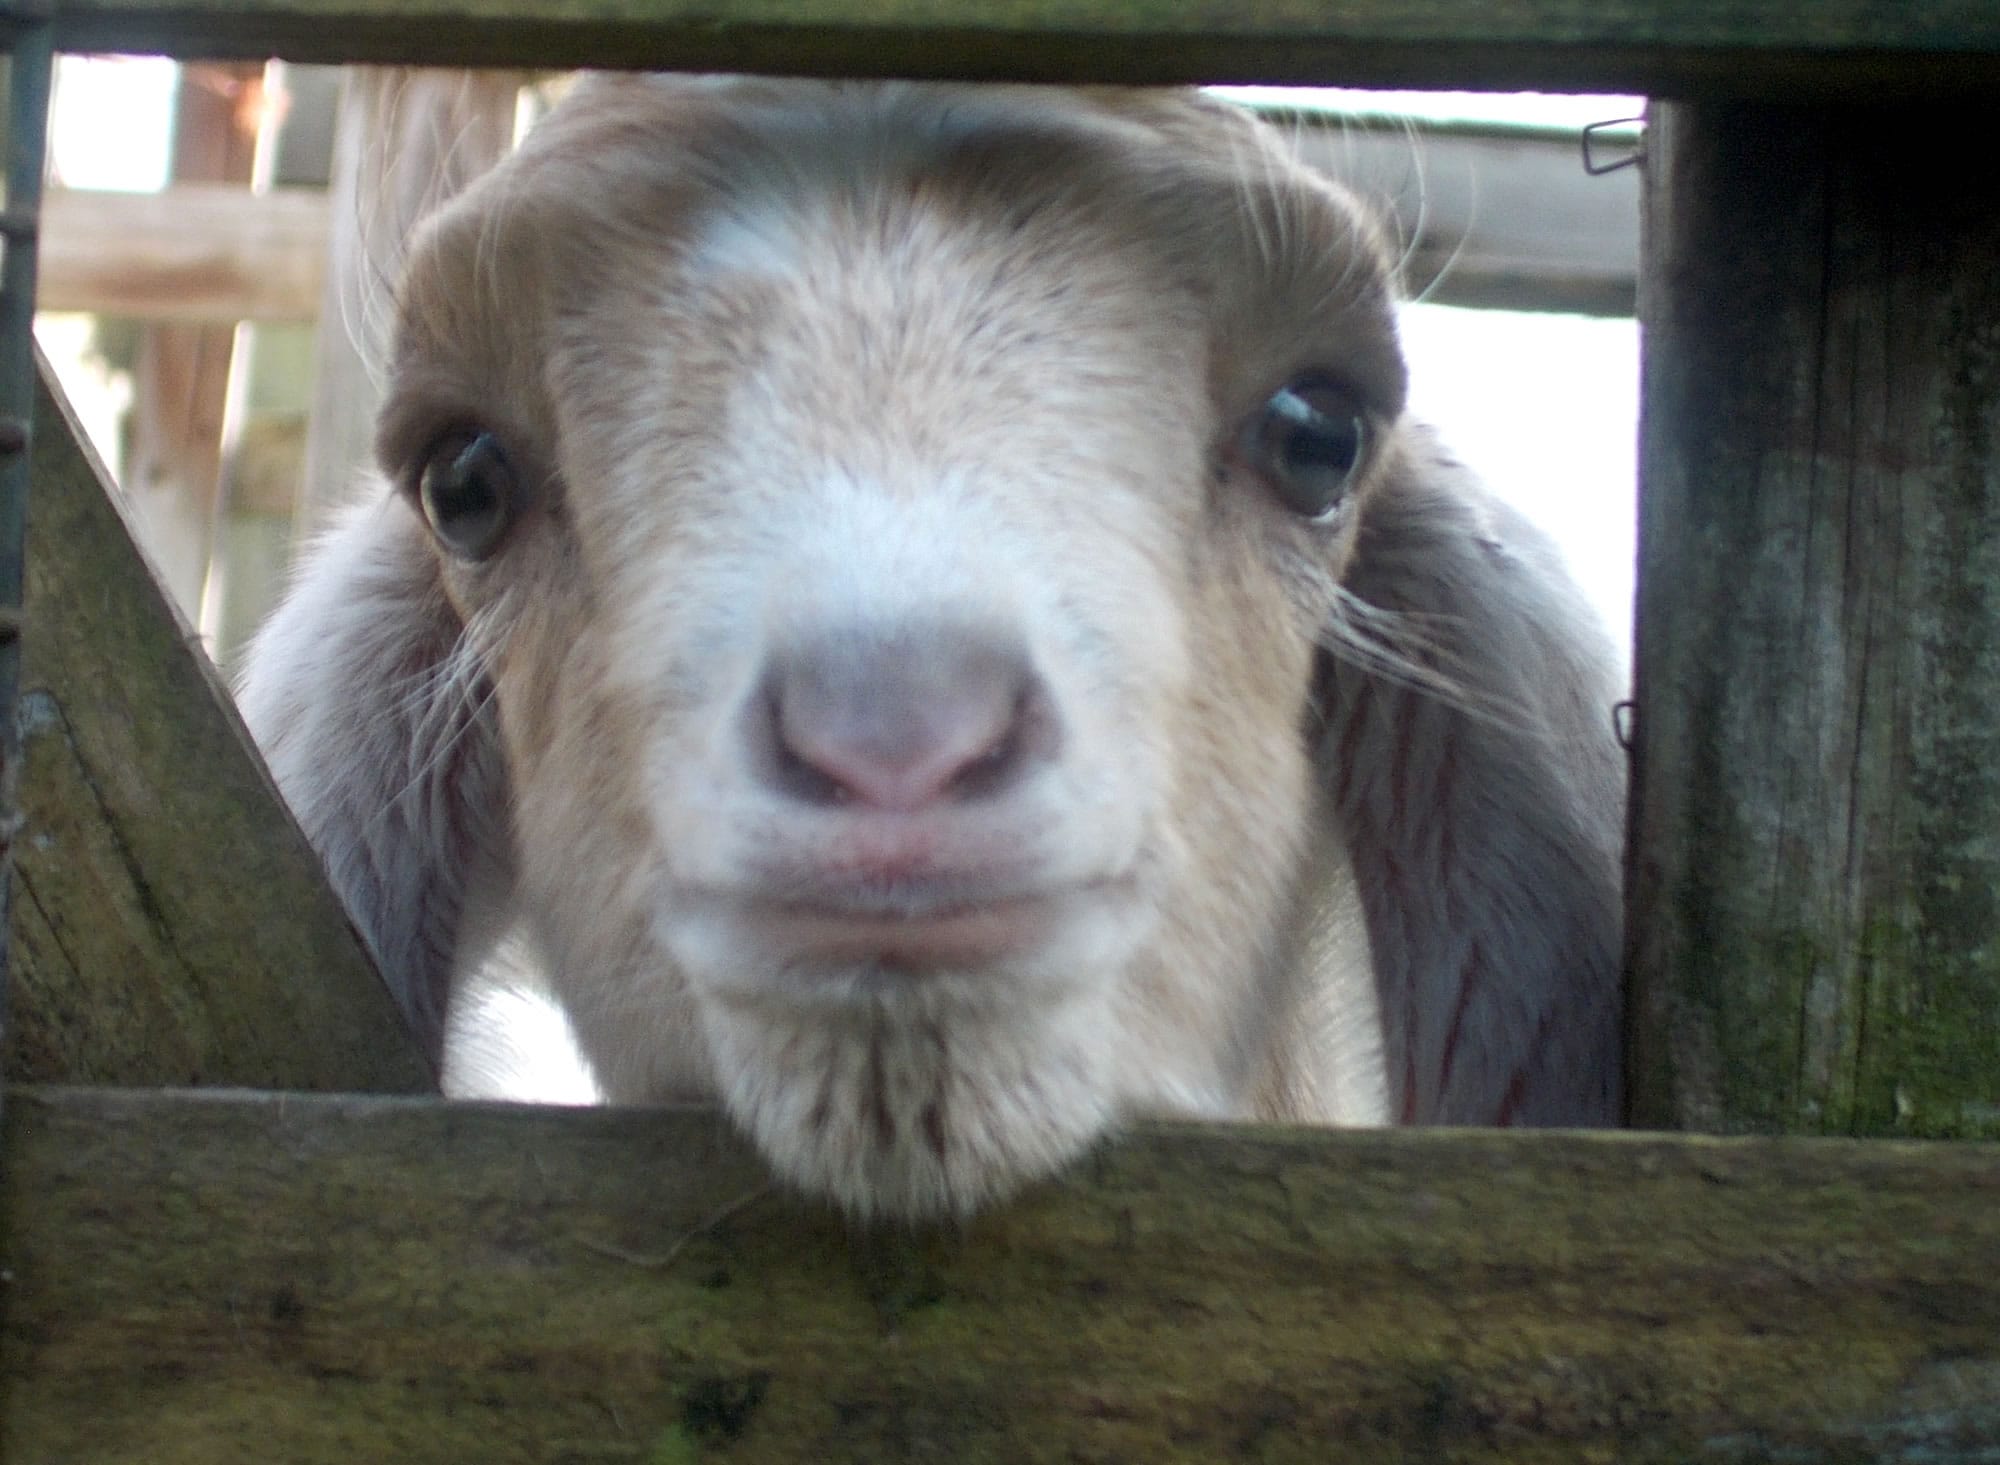 Maple, a goat being raised by Clark County 4-H member Zoey Scott, was one of three that vanished last week.